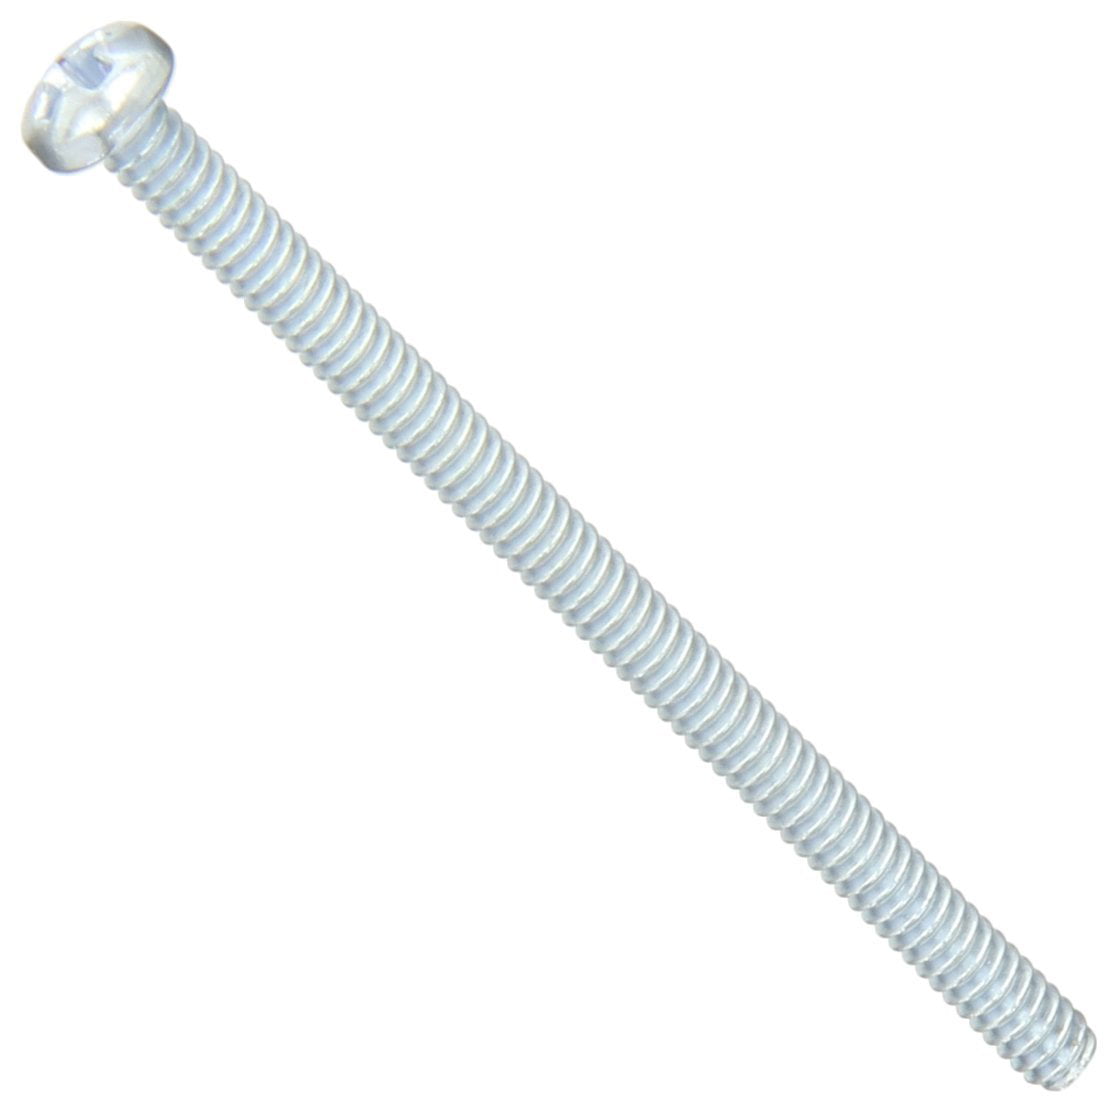 #5-40 Thread Size Meets ASME B18.6.3 Pack of 10000 Imported 5/16 Length Steel Pan Head Machine Screw Slotted Drive Zinc Plated Fully Threaded